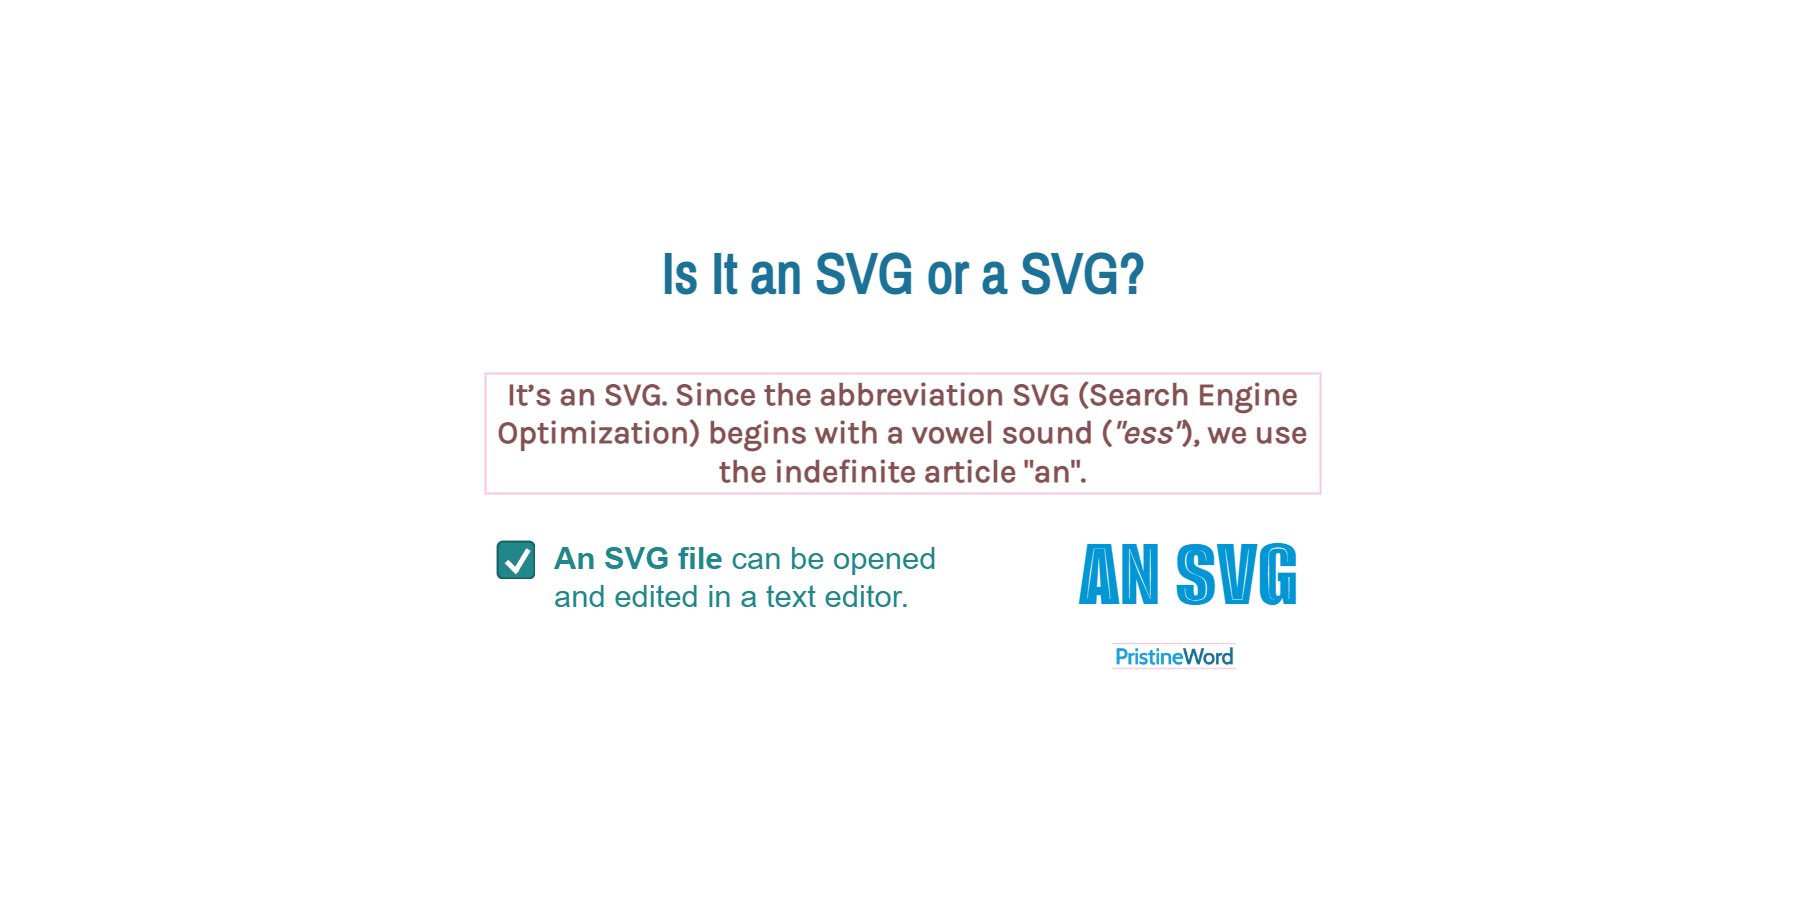 Is It an SVG or a SVG?